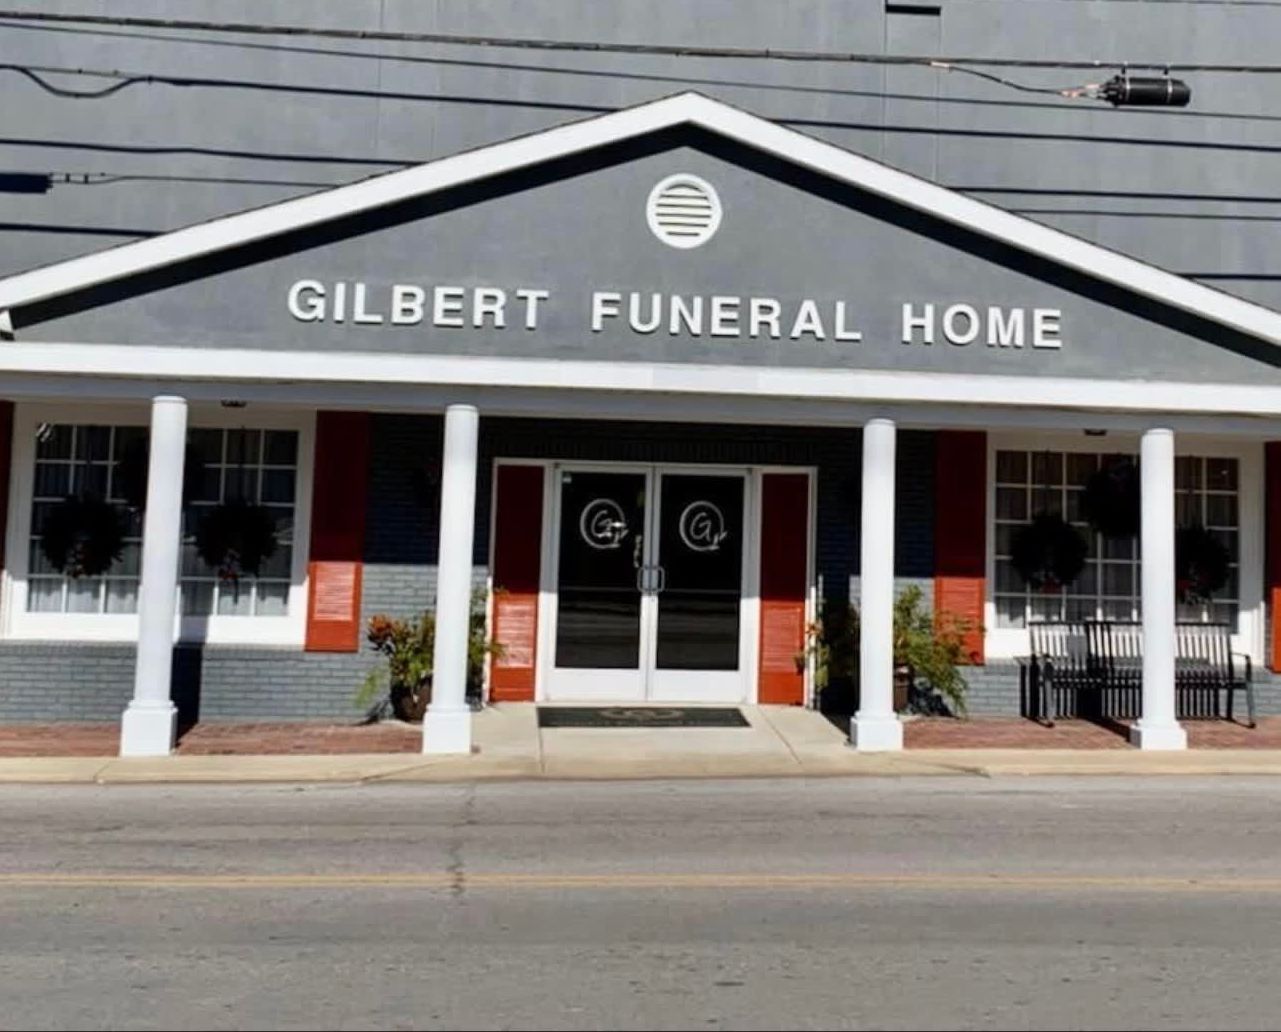 Exterior view of Gilbert Funeral Home in Marion, KY.